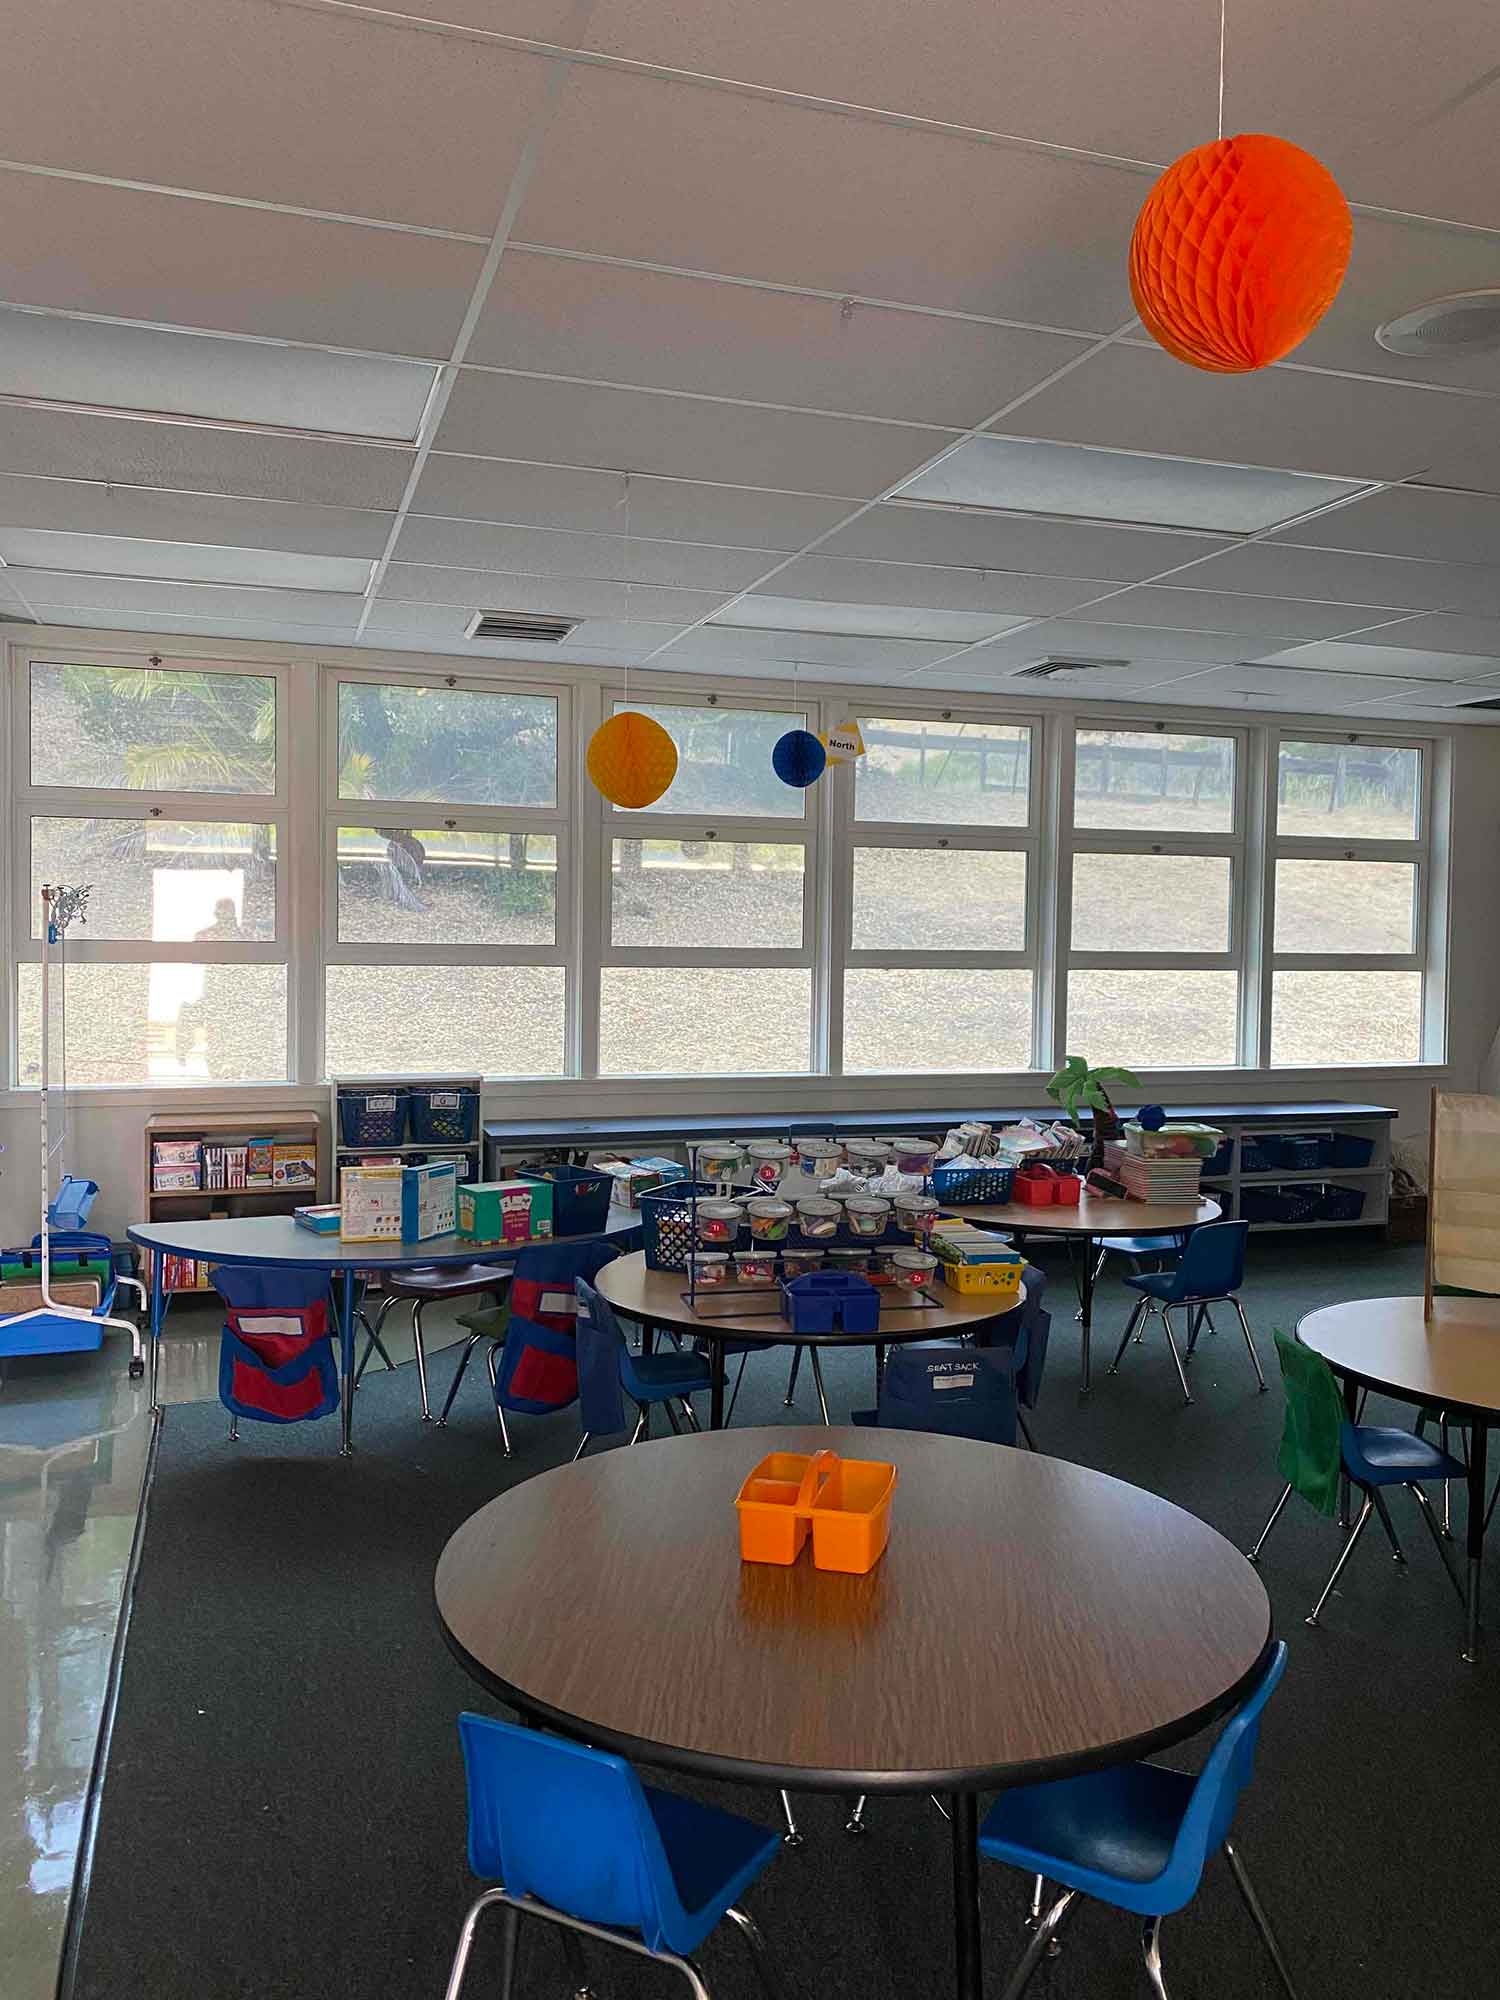 ClimatePro installed 3M Affinity Window Film at this elementary school in San Rafael, CA. Are there benefits of having window film installed in schools?